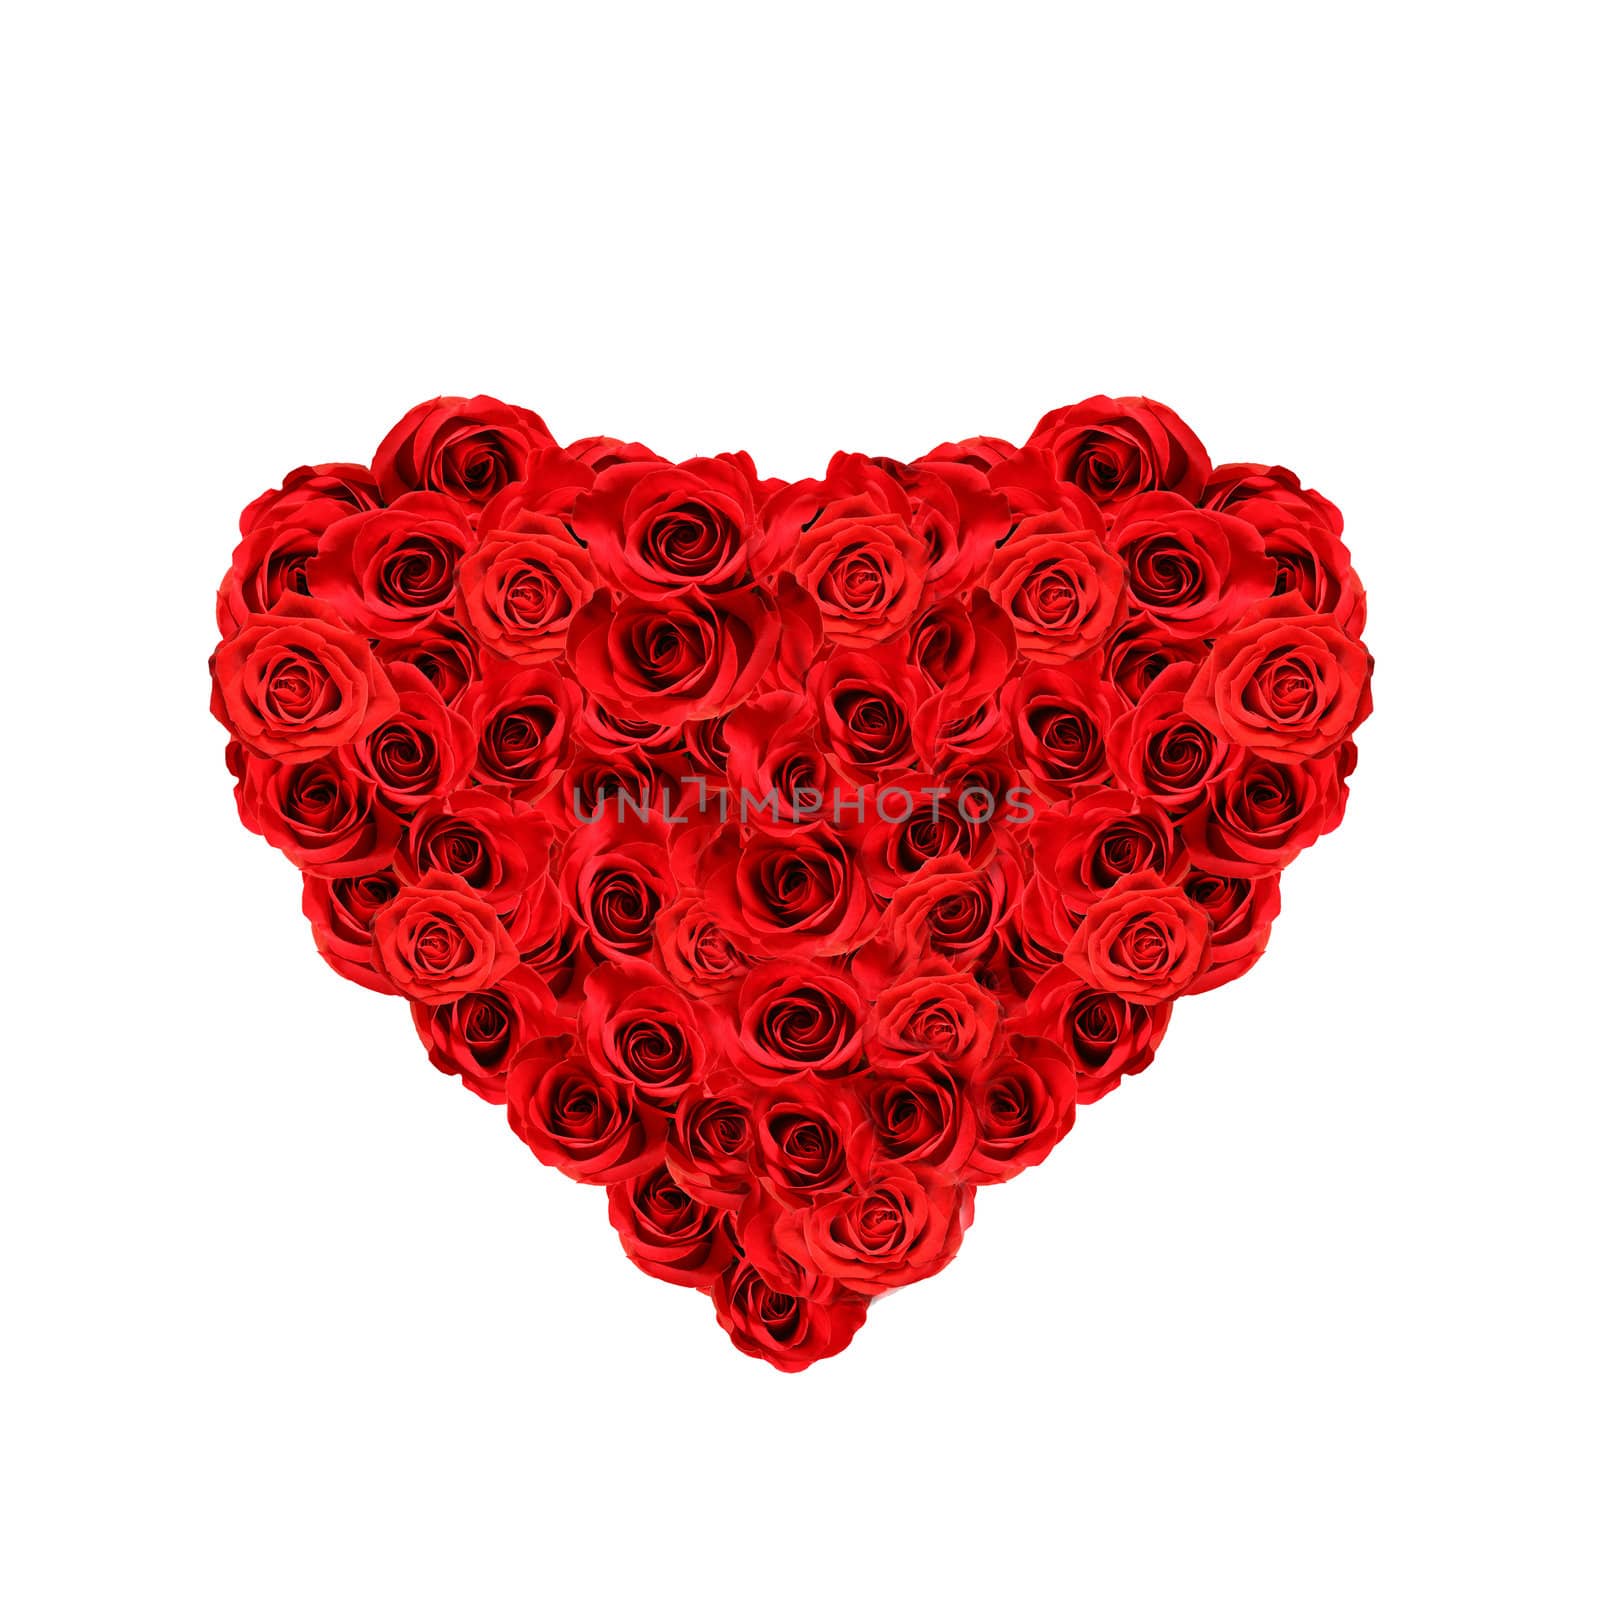 valentine's day heart made from red roses isolated on white background